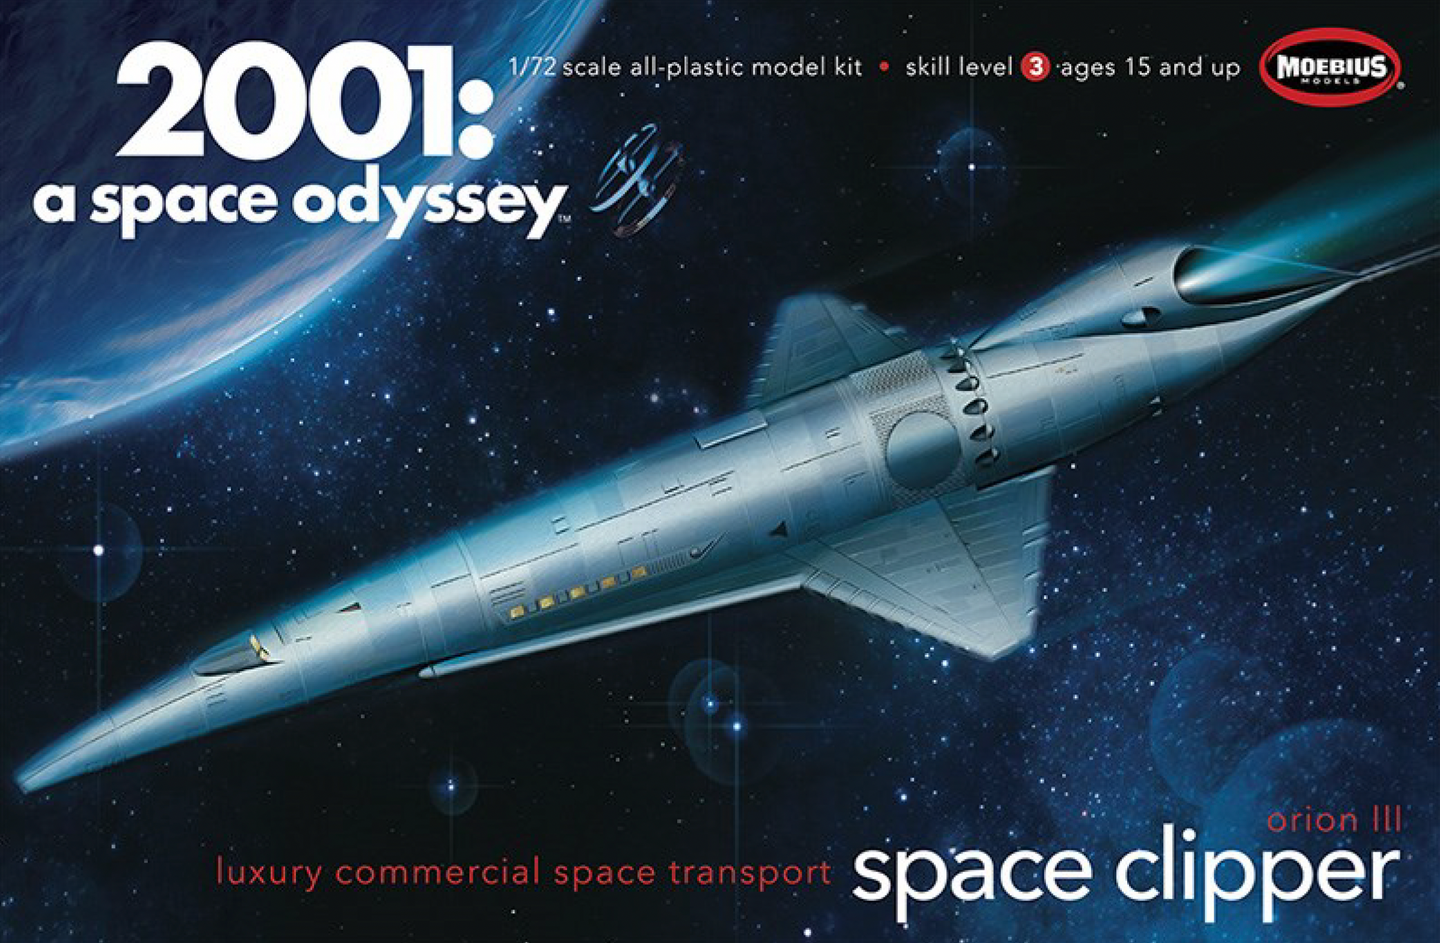 Moebius 2001: A Space Odyssey 1/72 Orion III Space Clipper  MOE2001-11